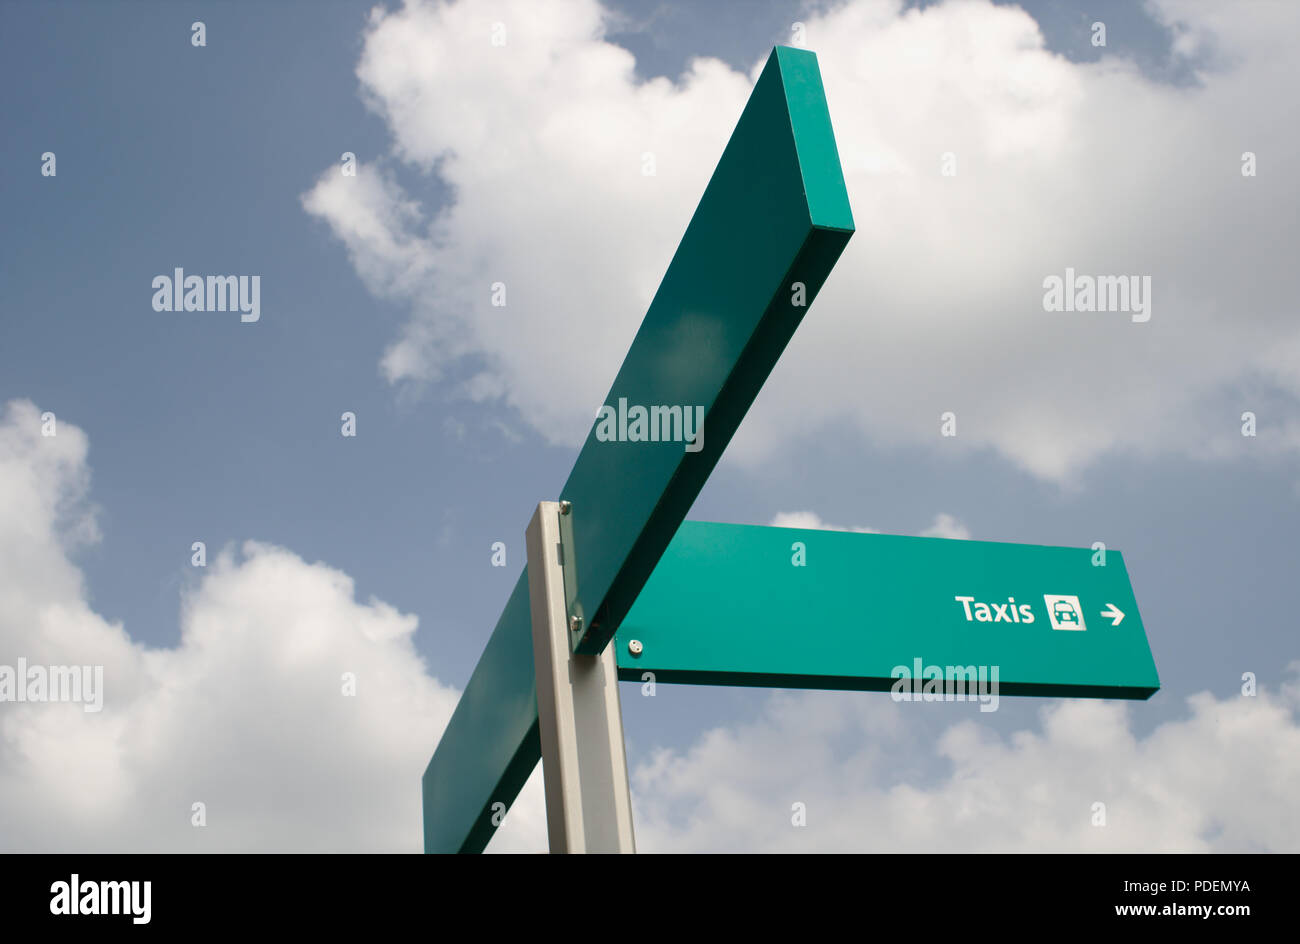 A taxi sign against a blue sky with clouds. Space to the left for text. Stock Photo